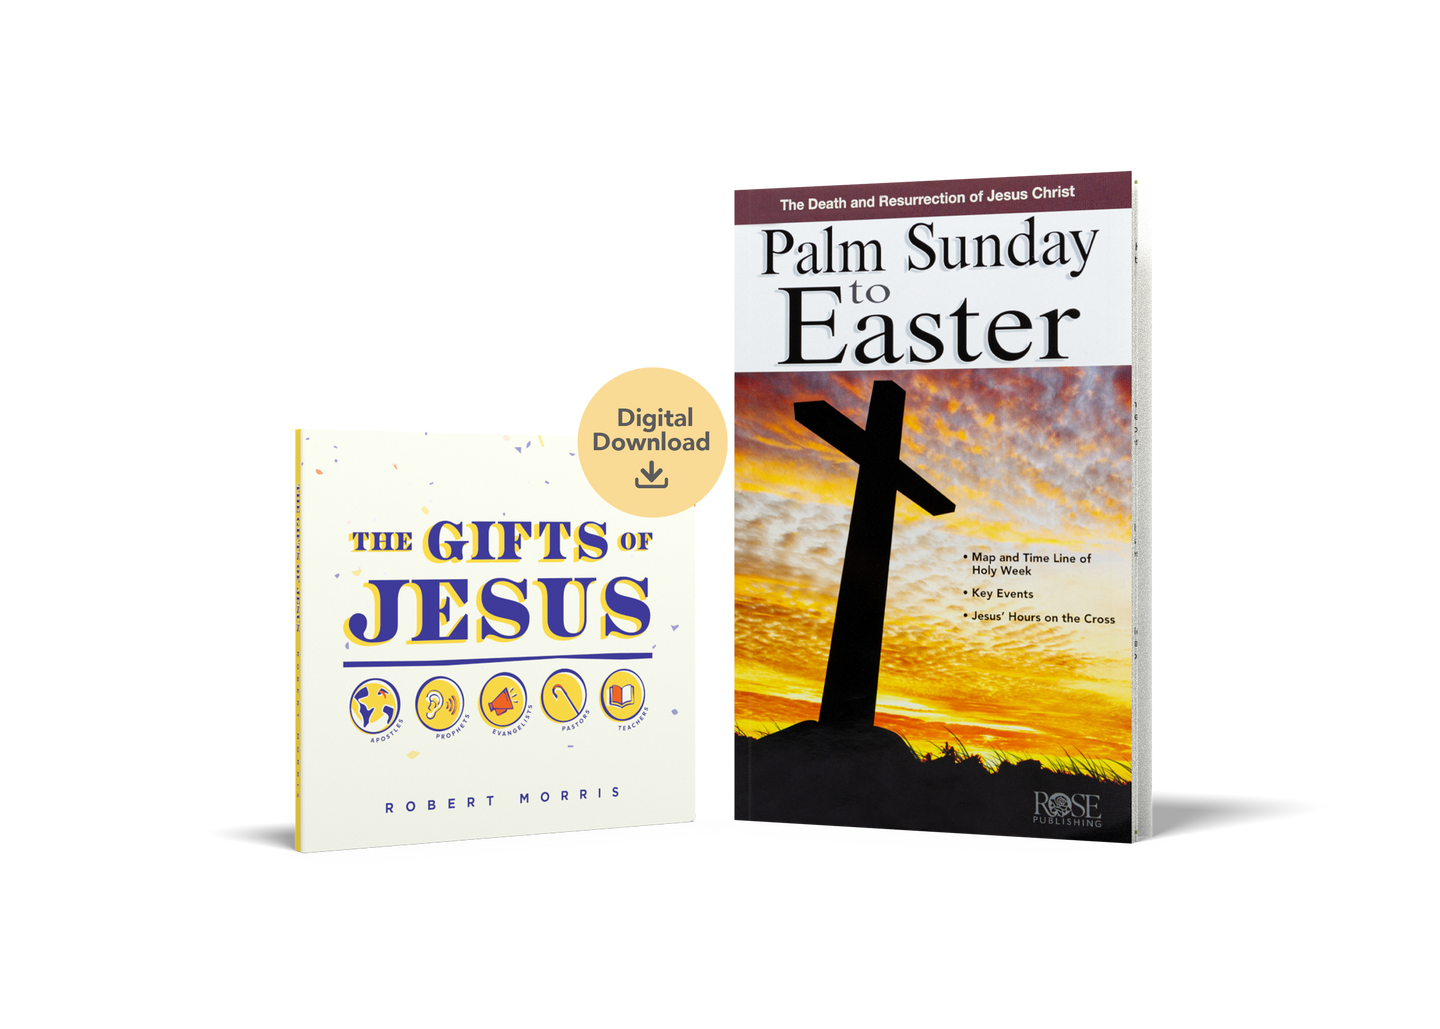 The Gifts of Jesus Special Digital Download Offer